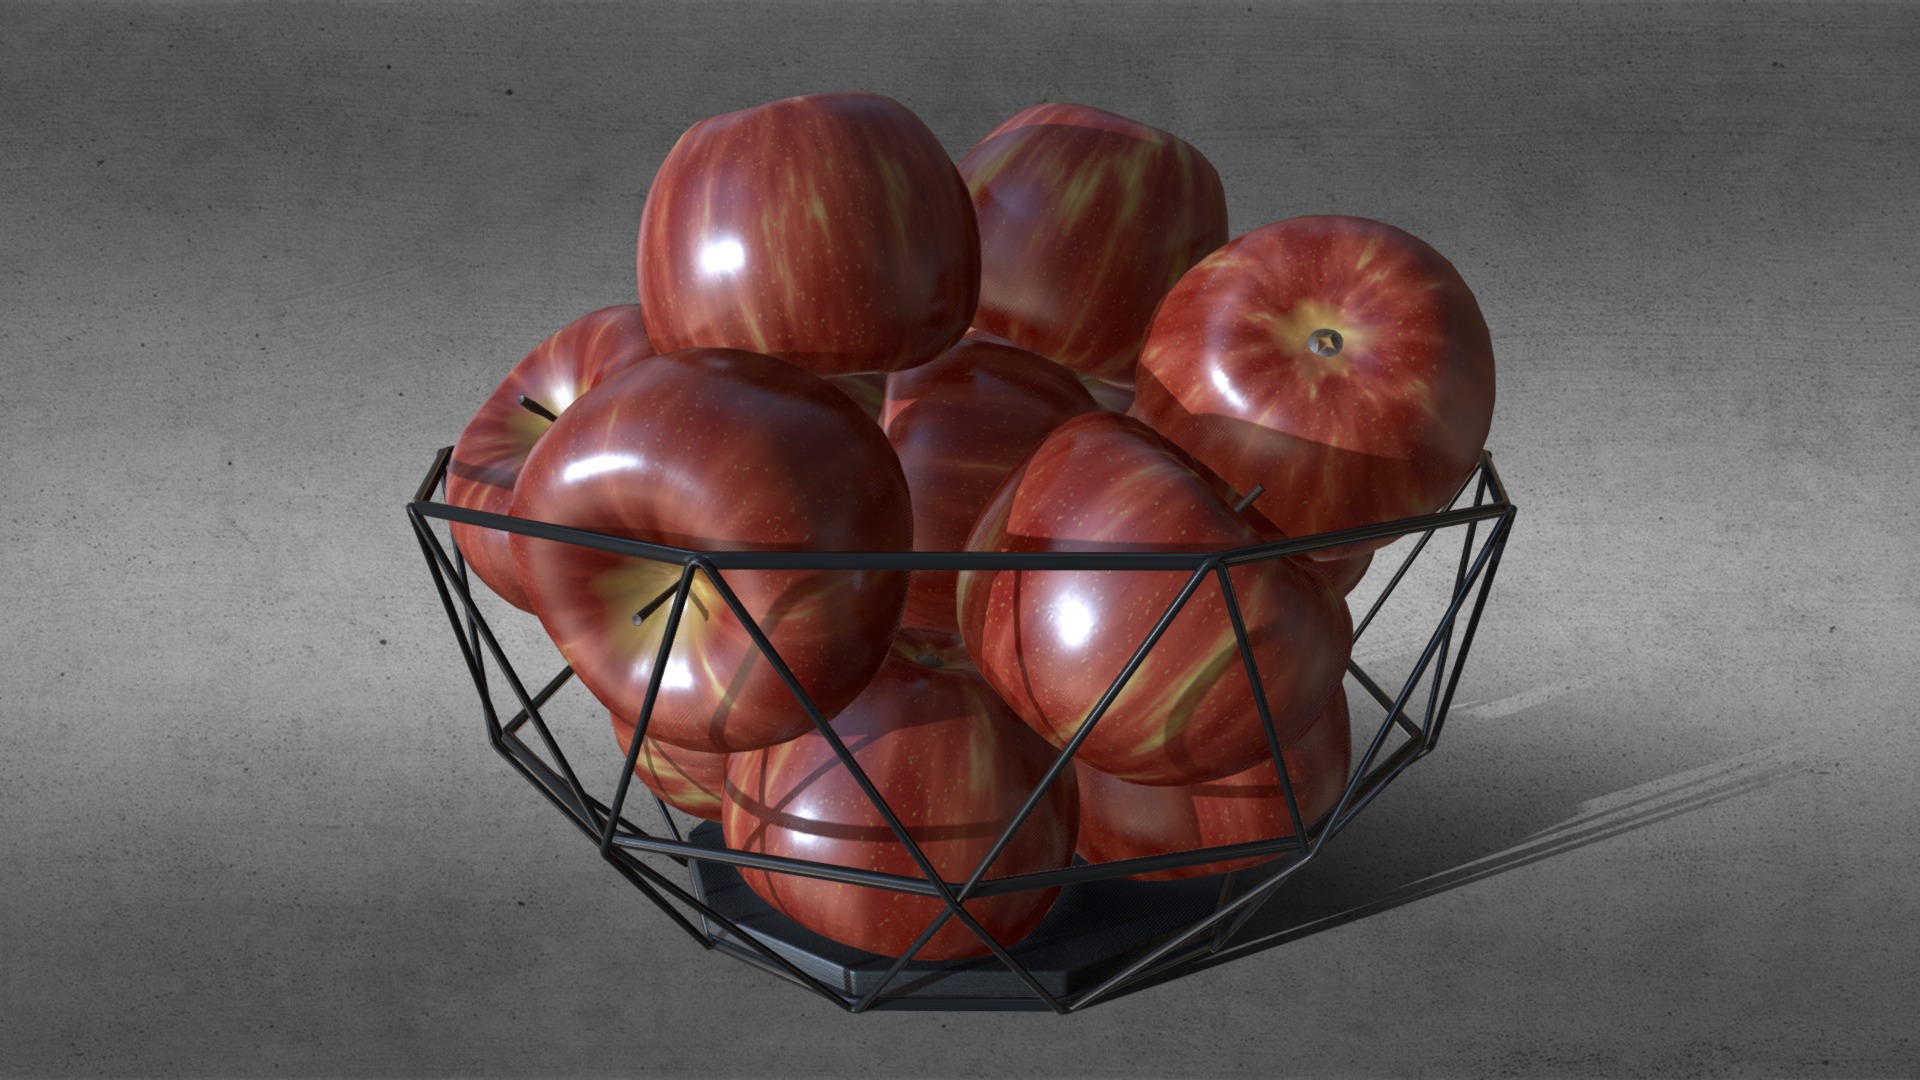 3D model Loft/Industrial Patera with Apples - This is a 3D model of the Loft/Industrial Patera with Apples. The 3D model is about a basket of red and yellow balls.